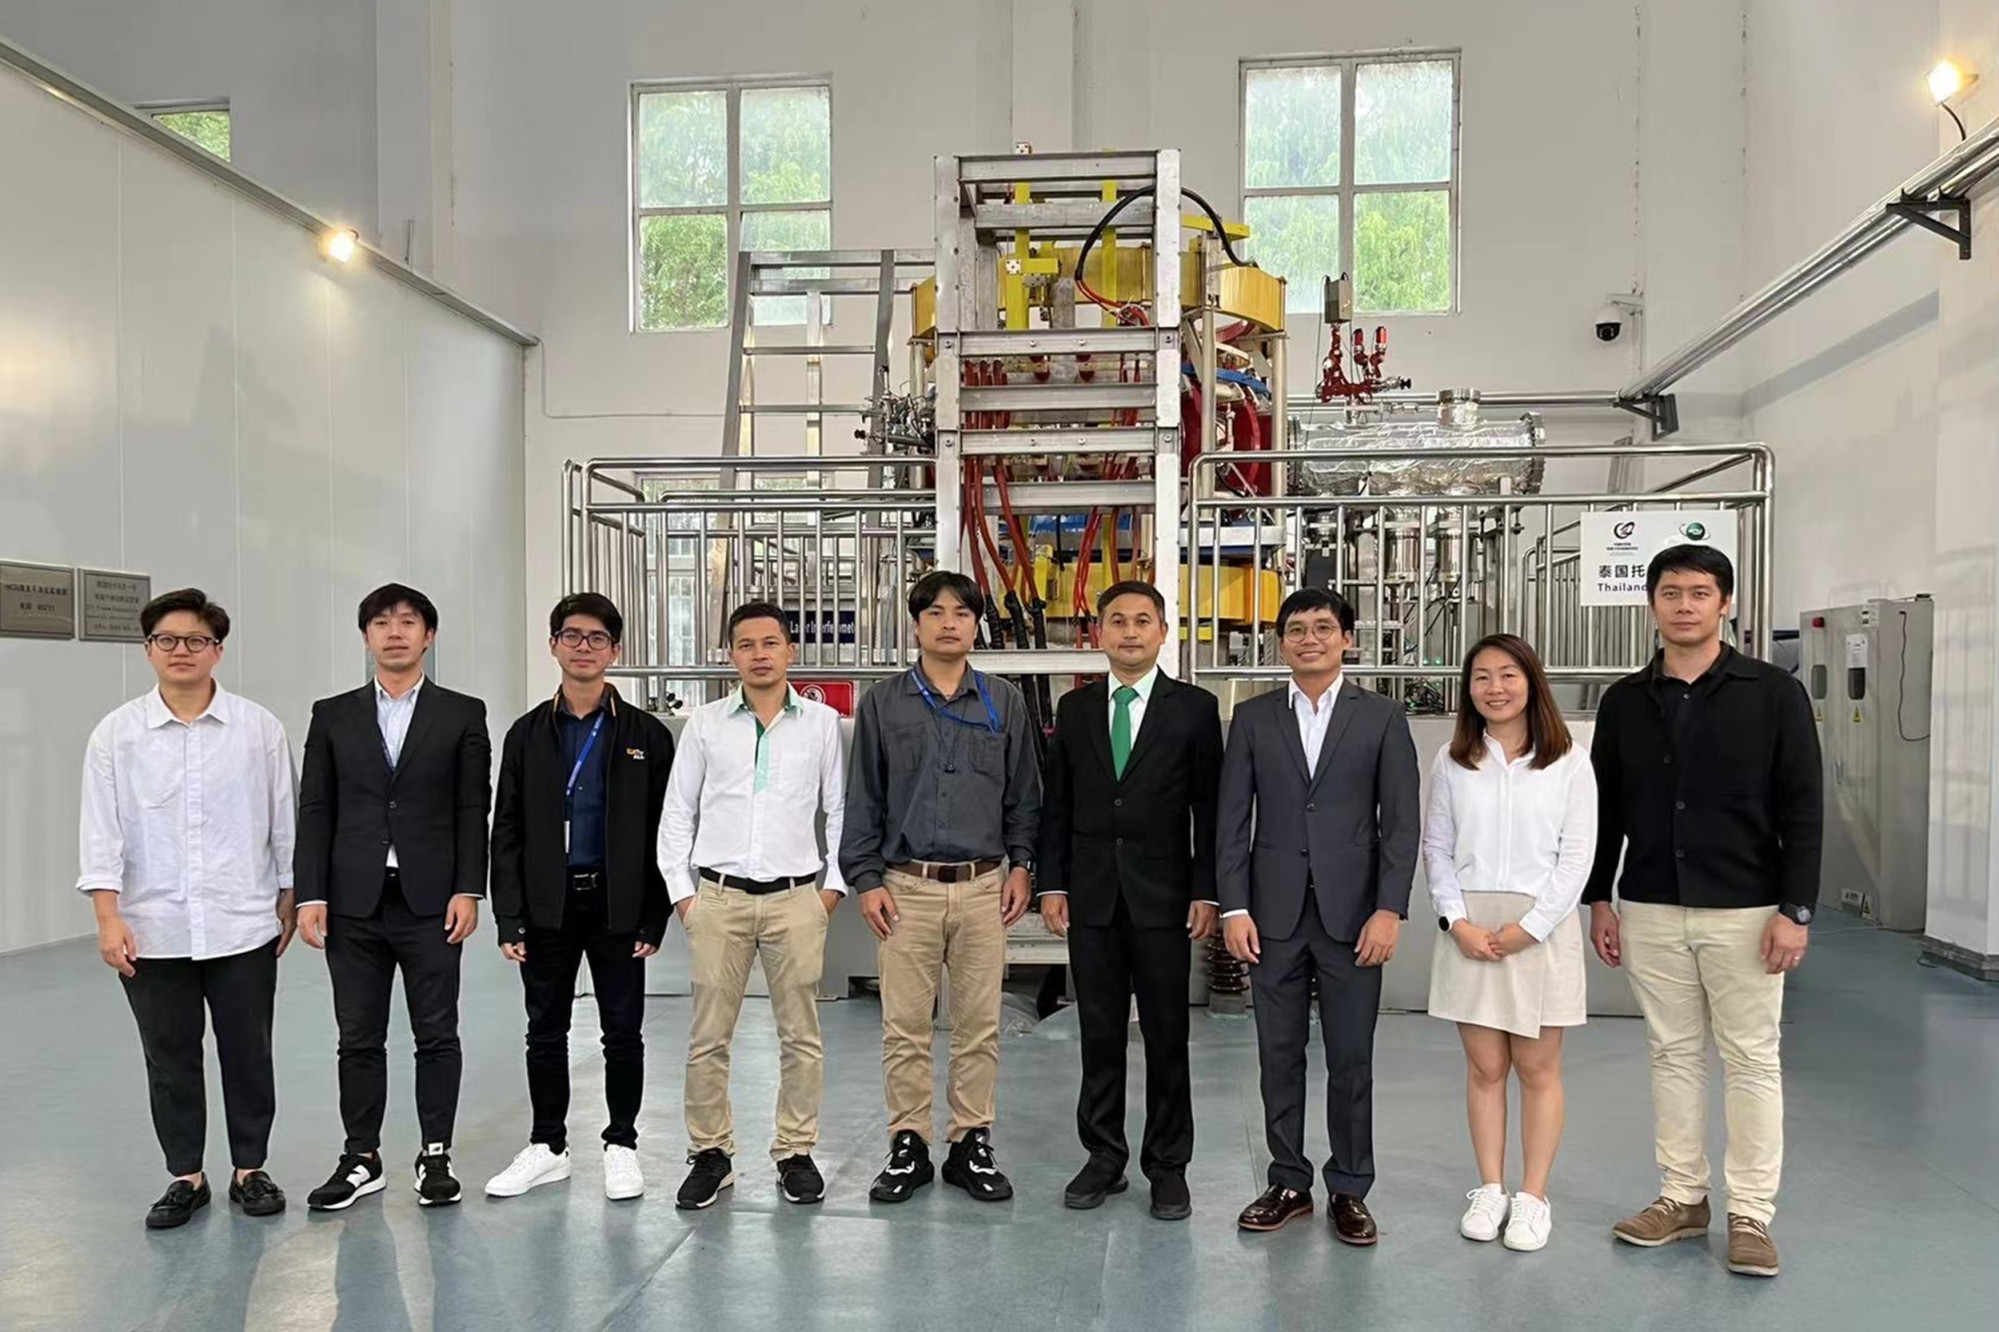 The nine members of the Thai team, including Nopporn Poolyarat (fourth from right), the head of the Thailand Institute of Nuclear Technology’s fusion and plasma division. Photo: Handout